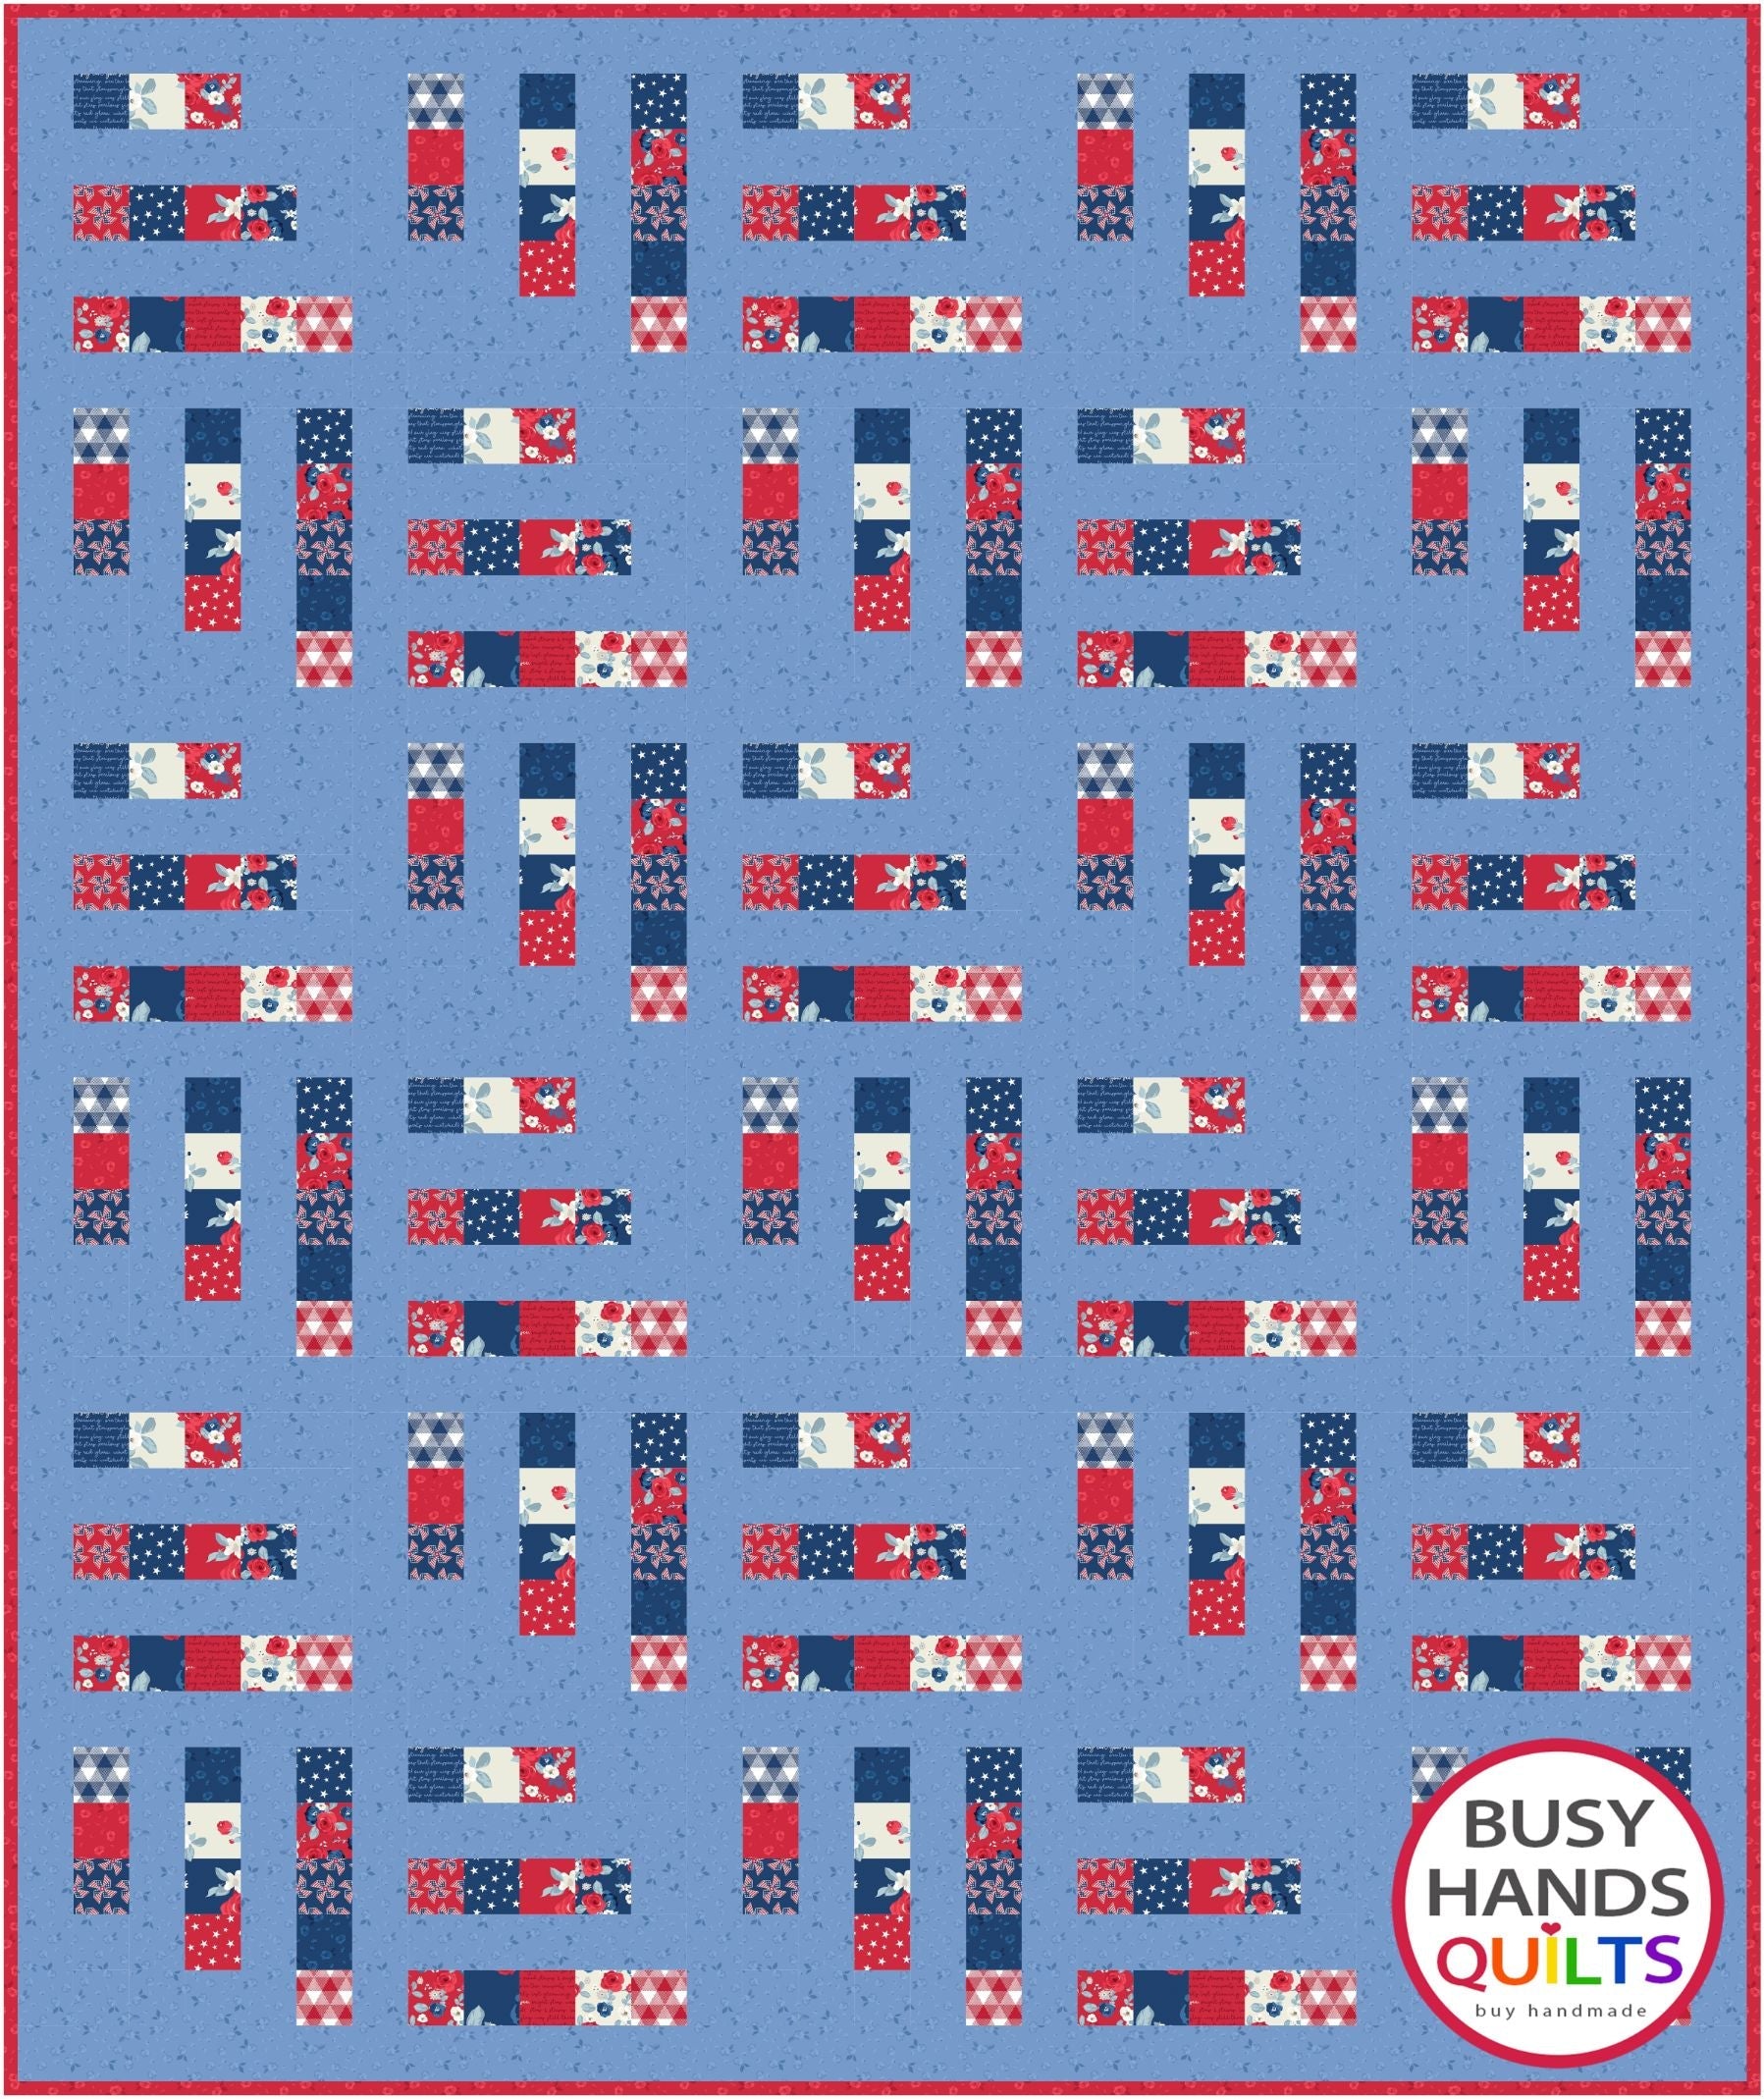 Good Morning Quilt Pattern PDF DOWNLOAD Busy Hands Quilts $12.99